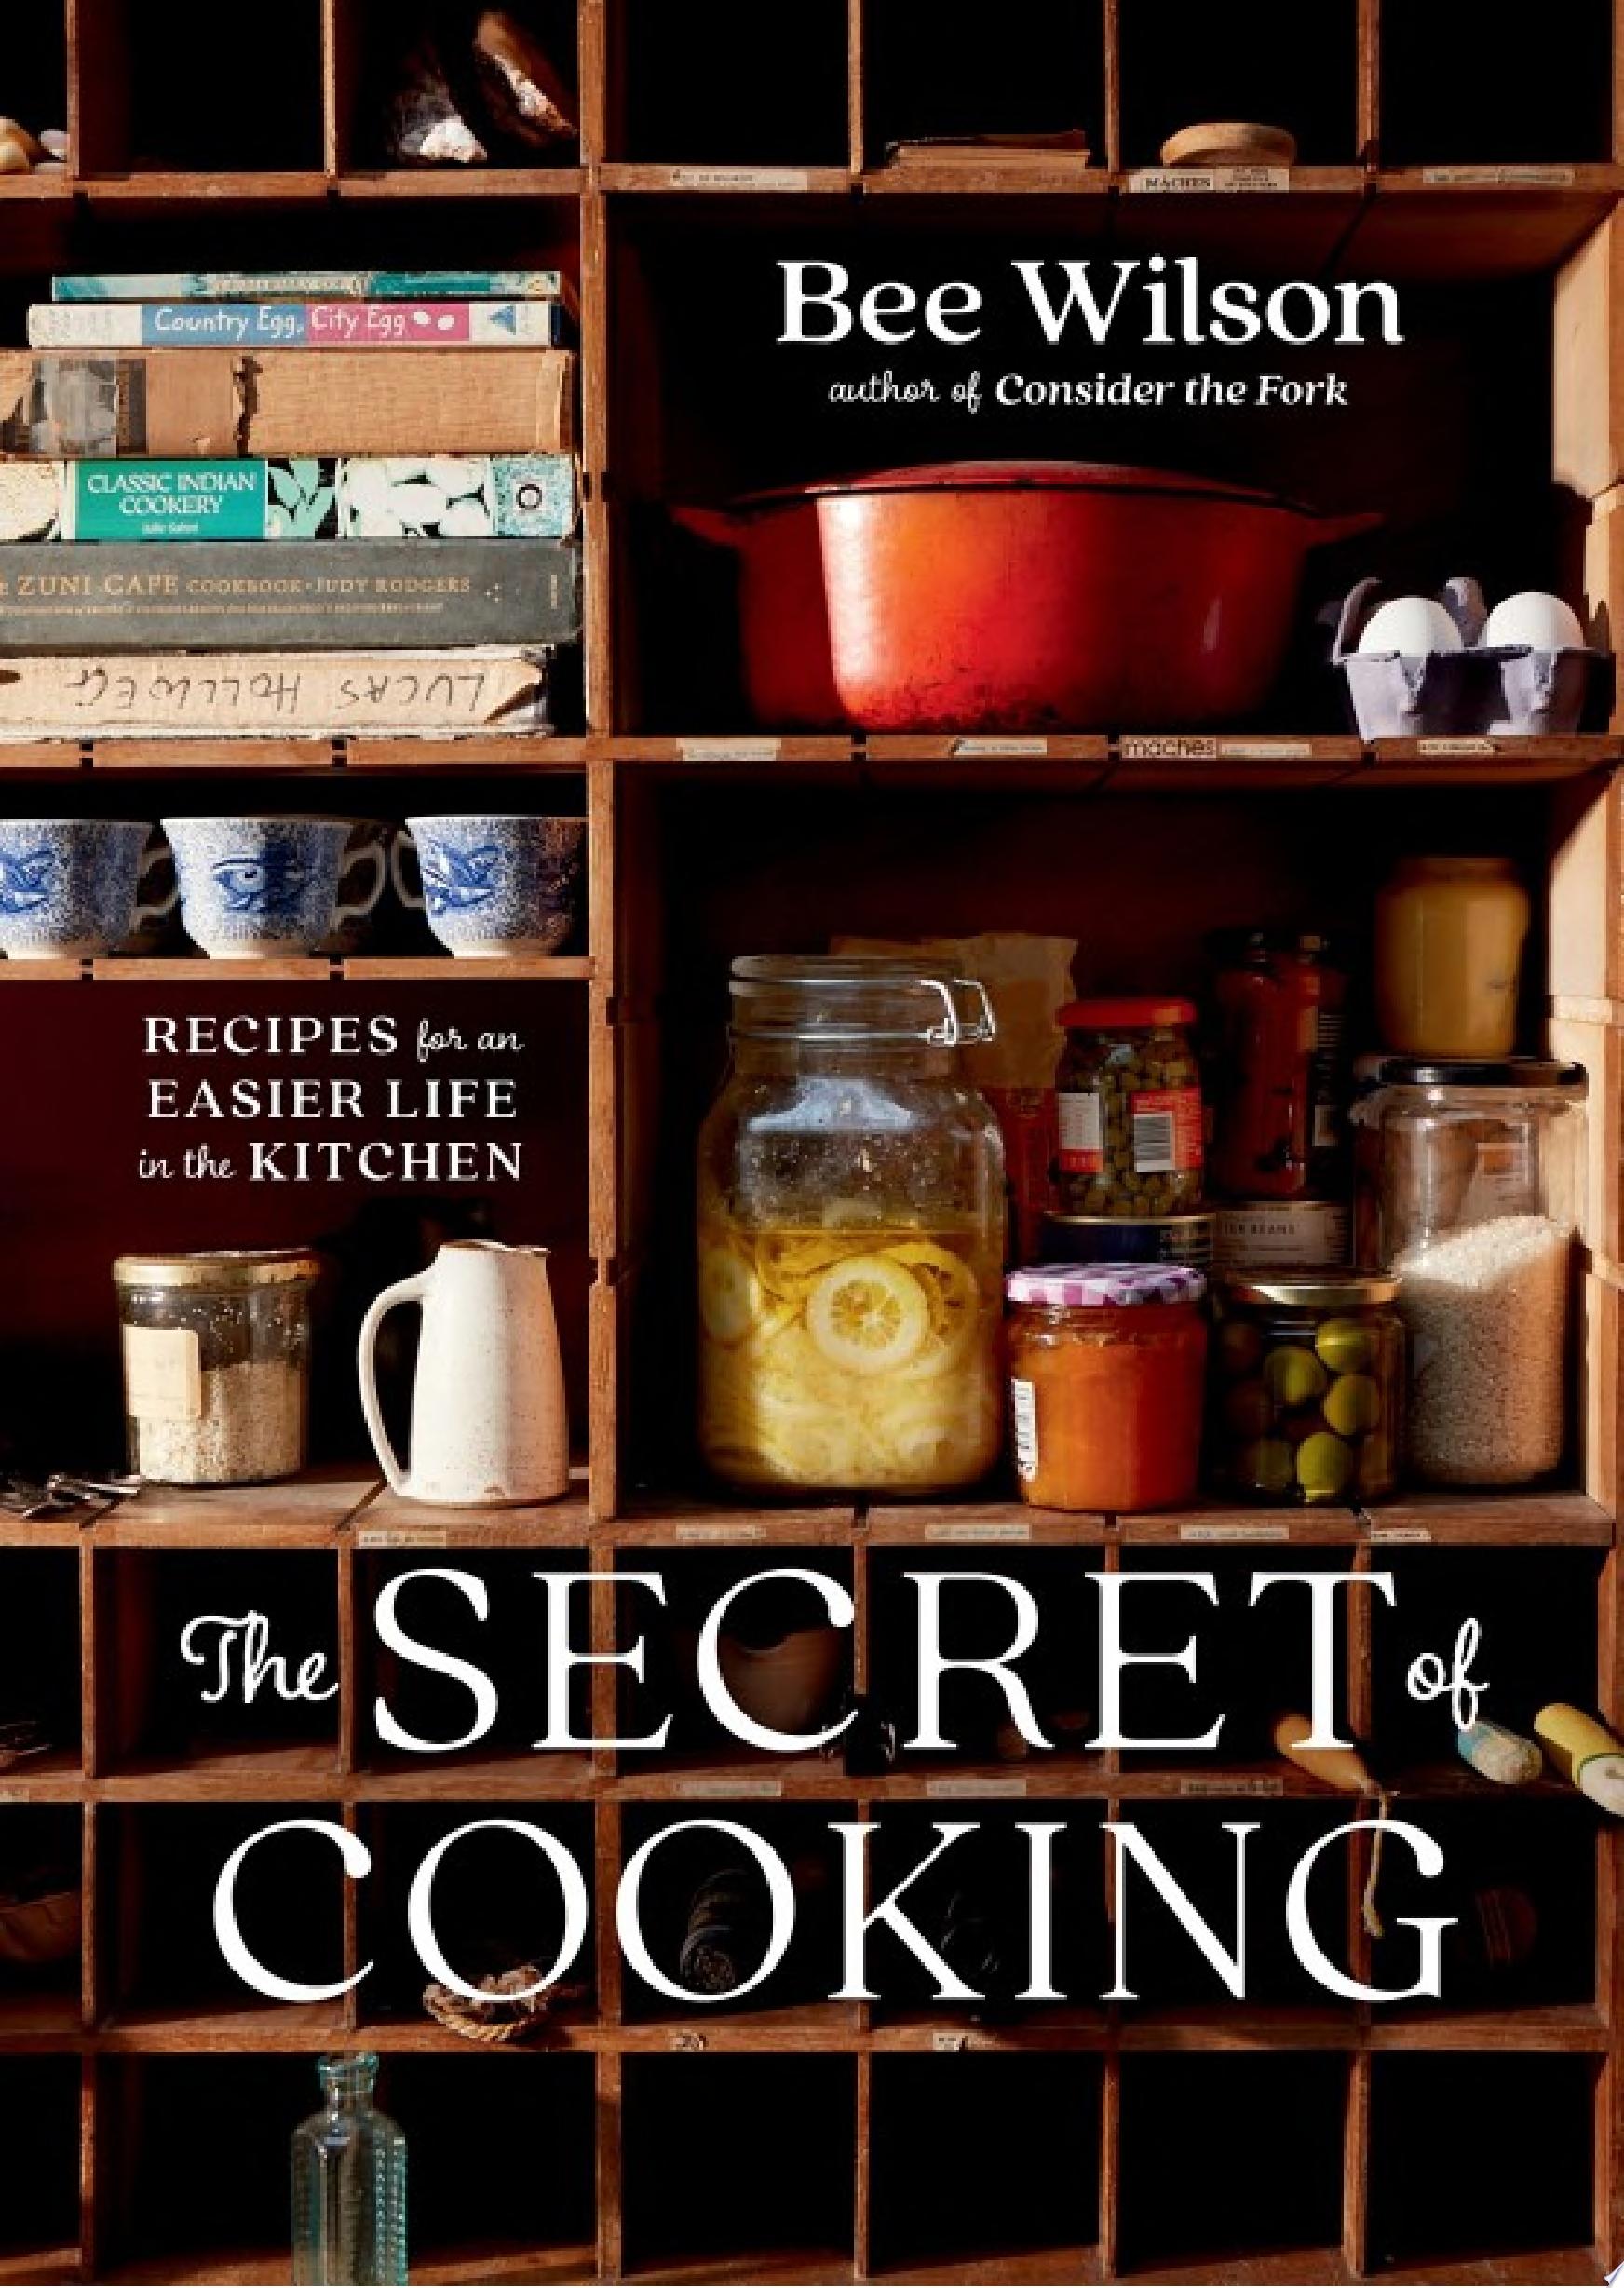 Image for "The Secret of Cooking: Recipes for an Easier Life in the Kitchen"